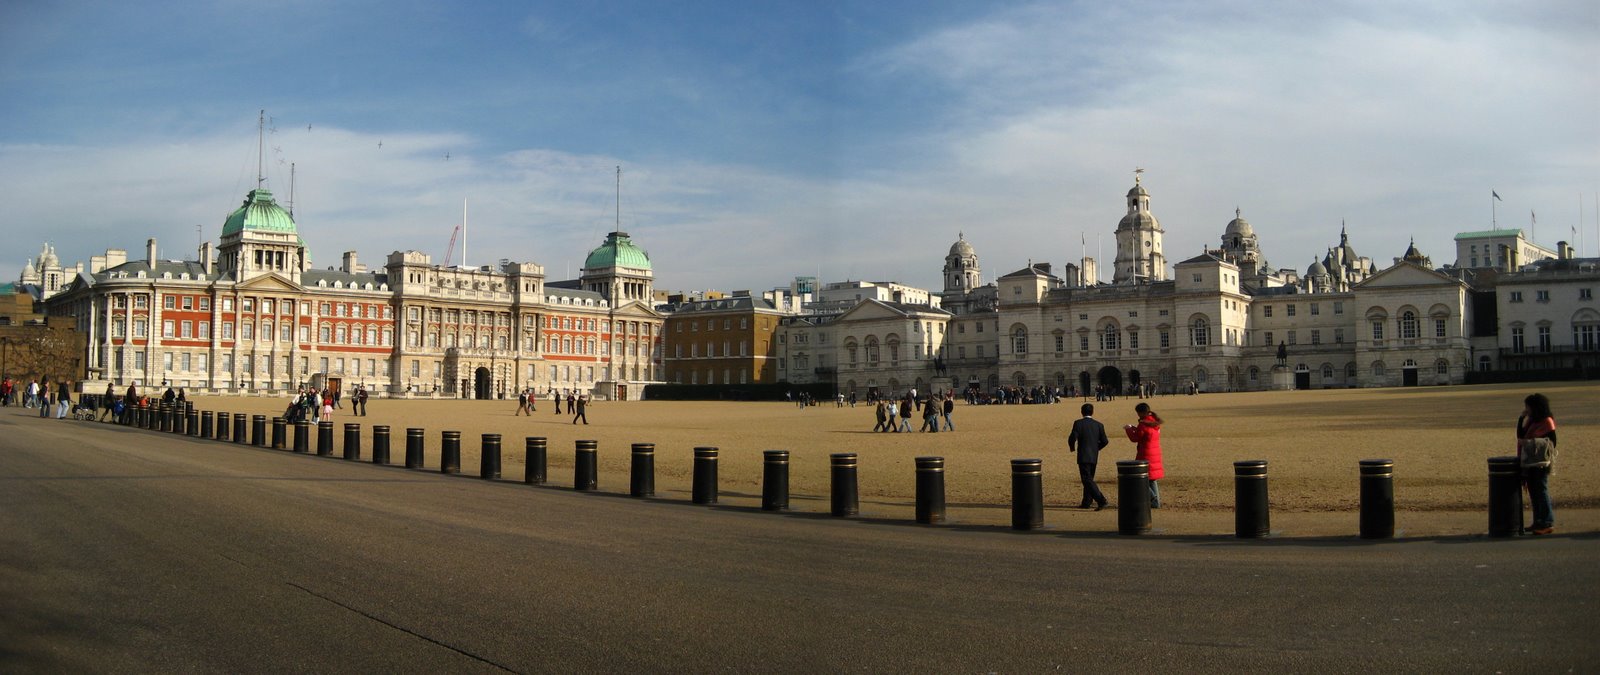 [horseguards]